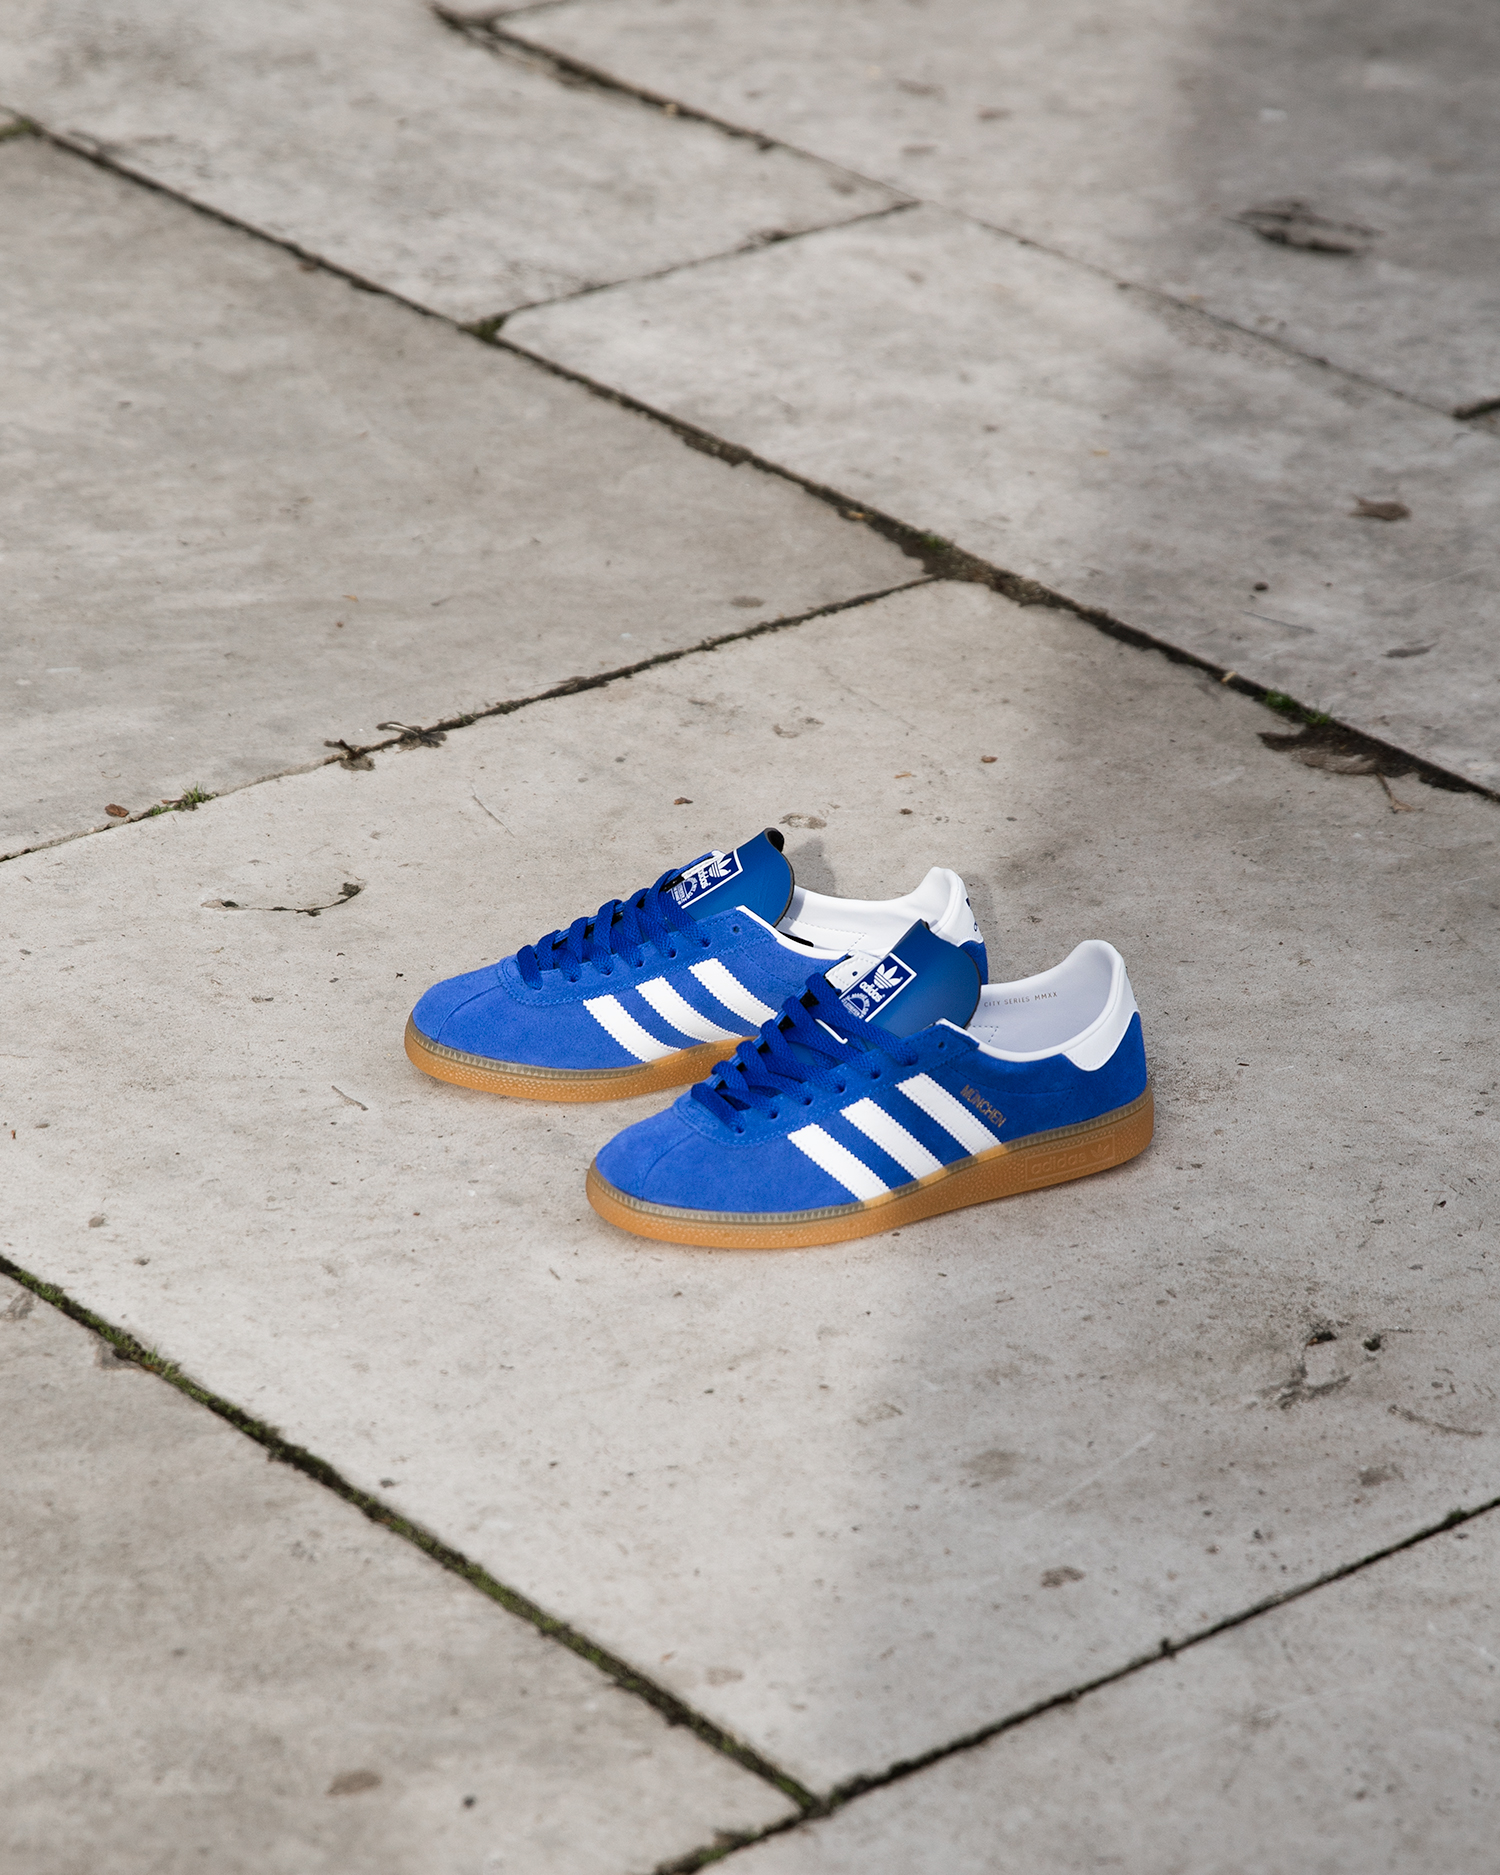 club Derecho monitor Footpatrol London on Twitter: "adidas München 'Royal Blue/Cloud White' .  Launching in-store and online on Saturday 17th October (Available online  from 08:00AM BST), sizes range from UK6 - UK12, priced at £85. #